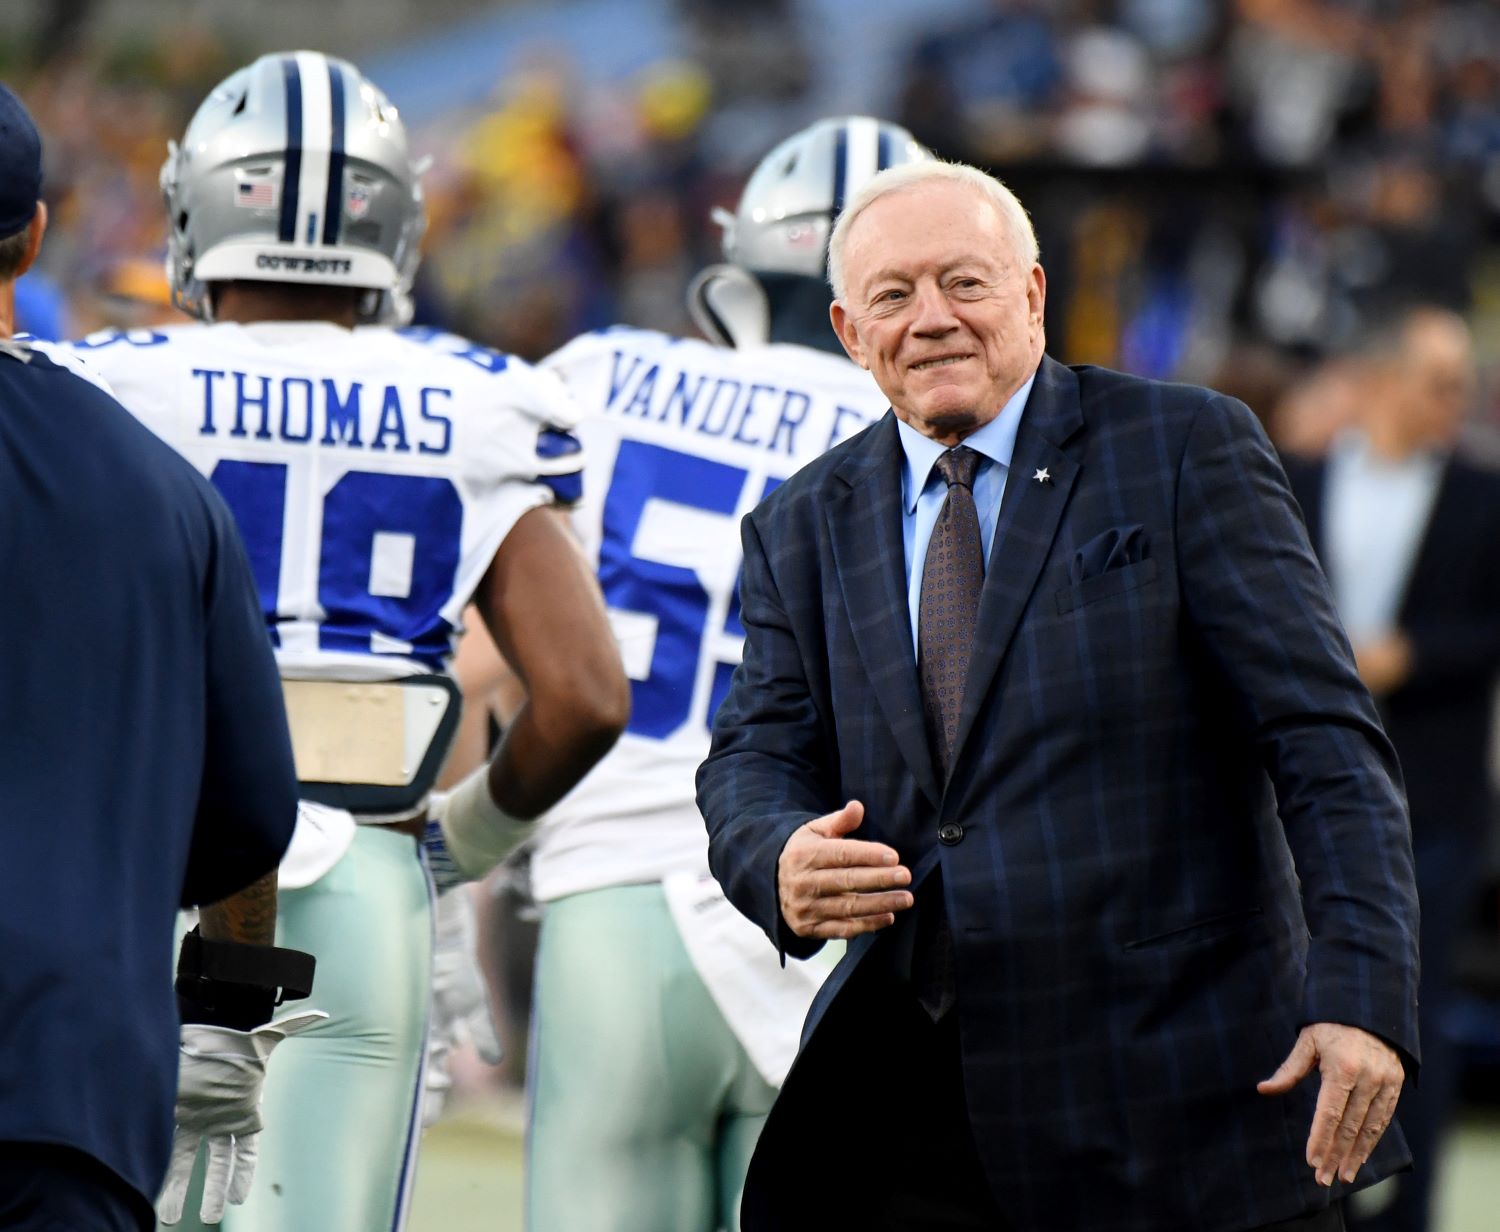 Jerry Jones just sent a strong message about Andy Dalton, who will be tasked with leading the Cowboys in the wake of Dak Prescott's season-ending ankle injury.